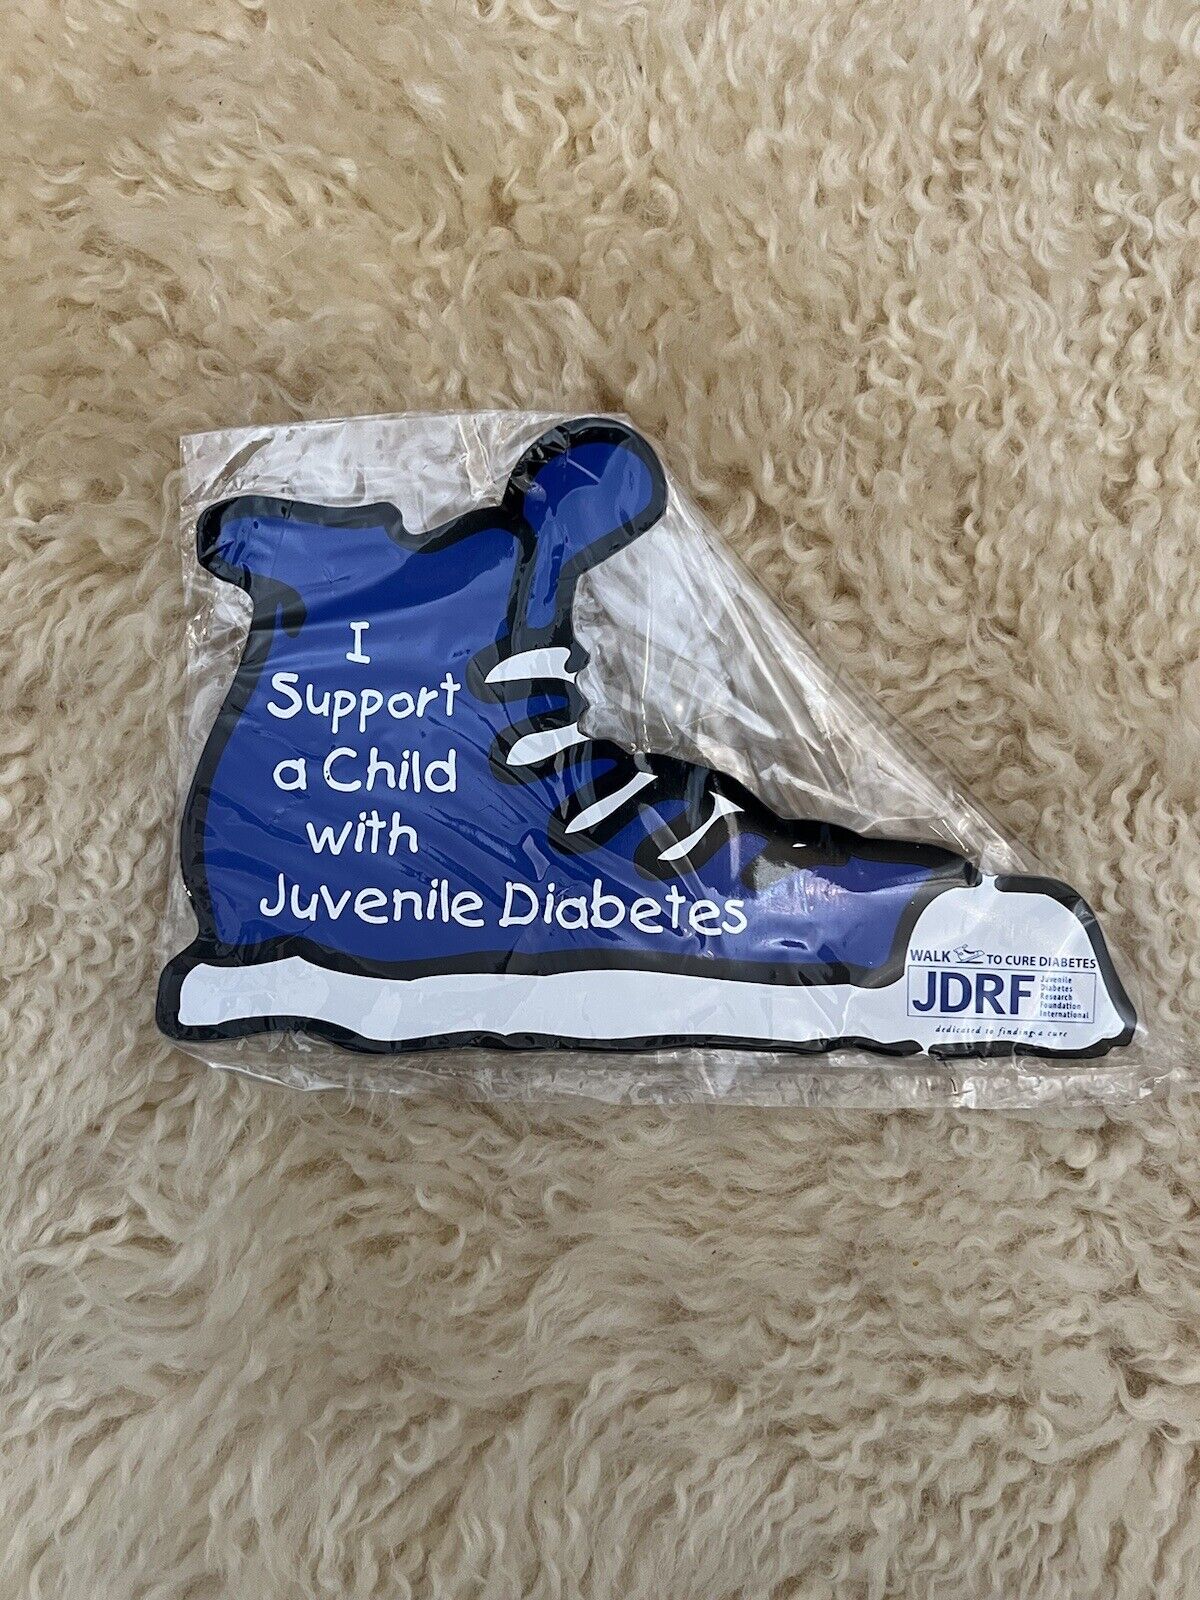 NEW “I Support a Child with Juvenile Diabetes” JDRF WALK Magnet BLUE SNEAKER